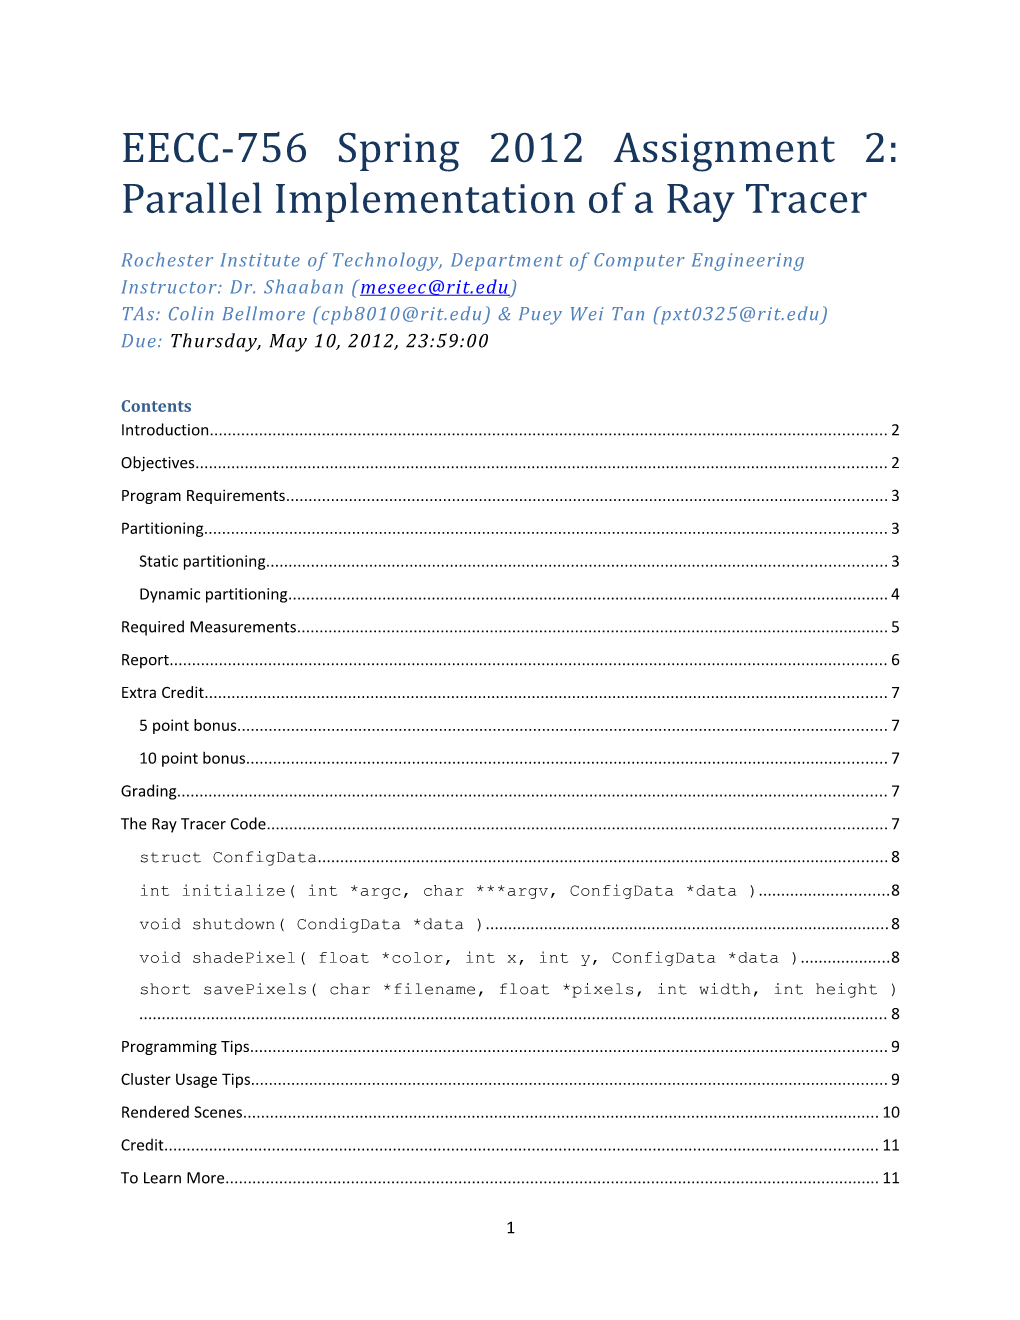 EECC-756 Spring 2012 Assignment 2: Parallel Implementation of a Ray Tracer